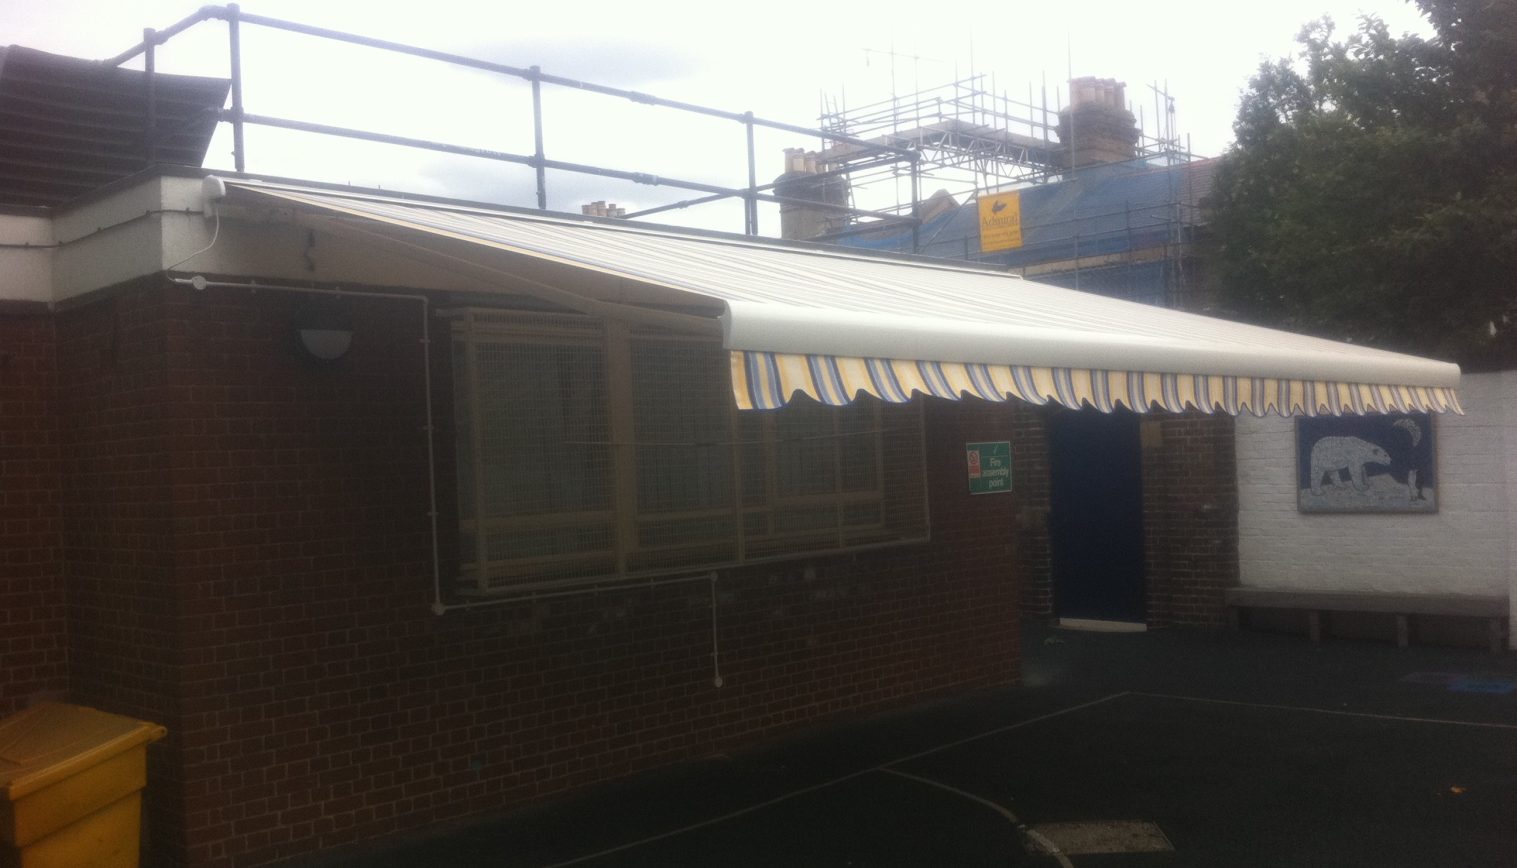 Queen’s Park Primary School – Commercial Awning